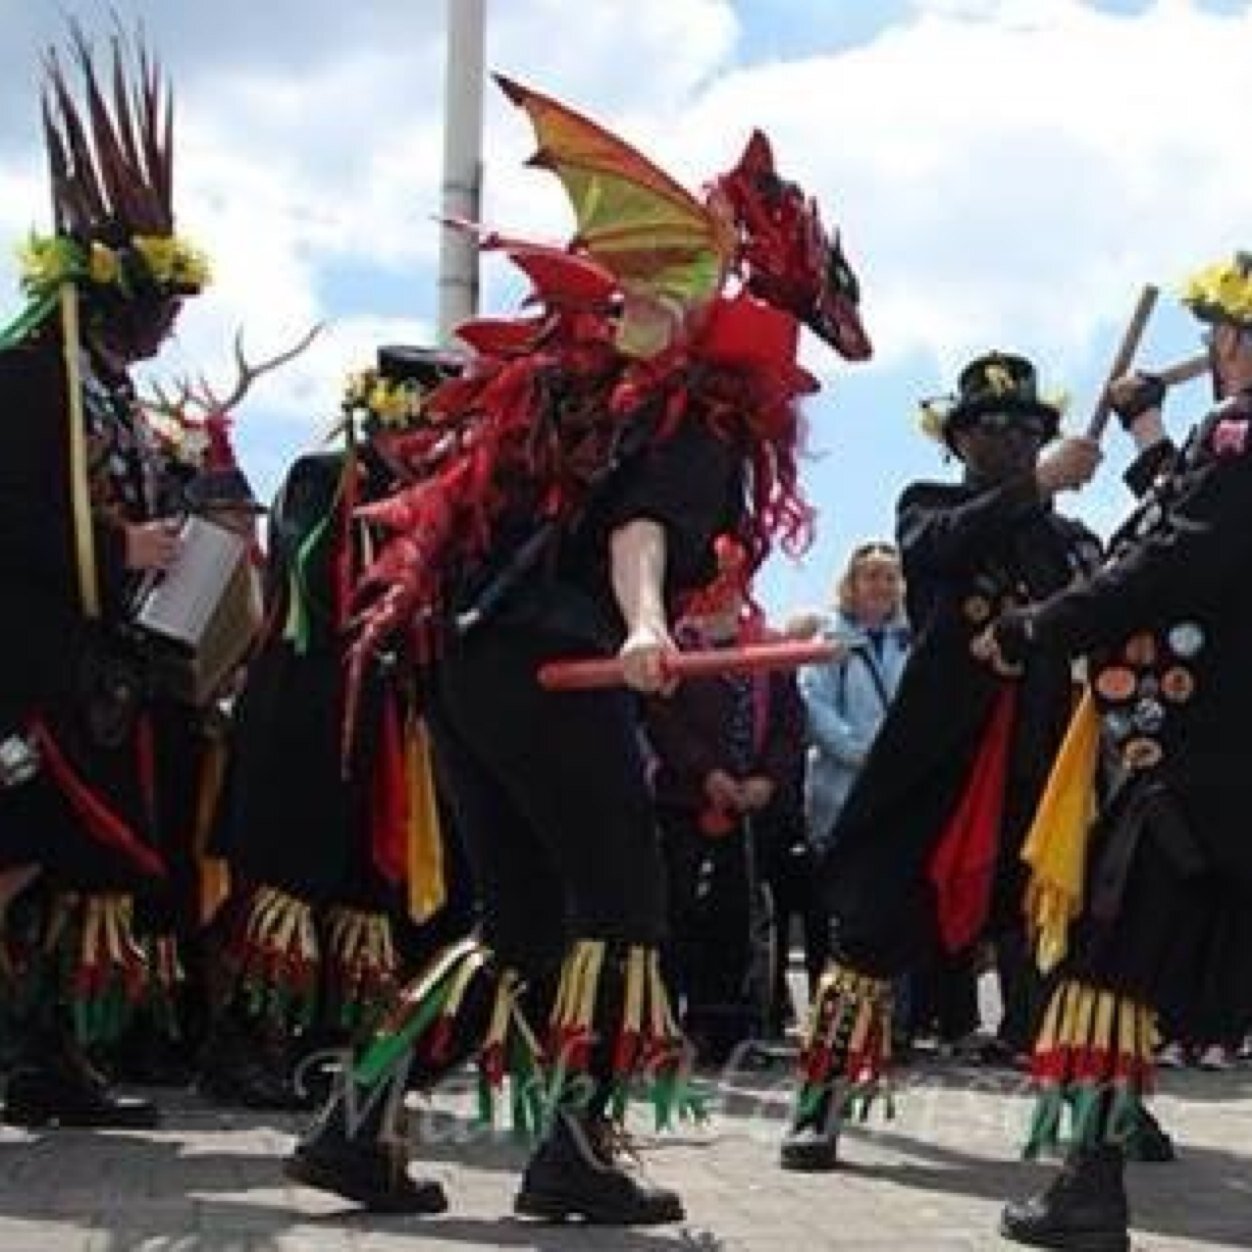 Welsh border morris dancers, street entertainers and ceilidh band. Morris with attitude!